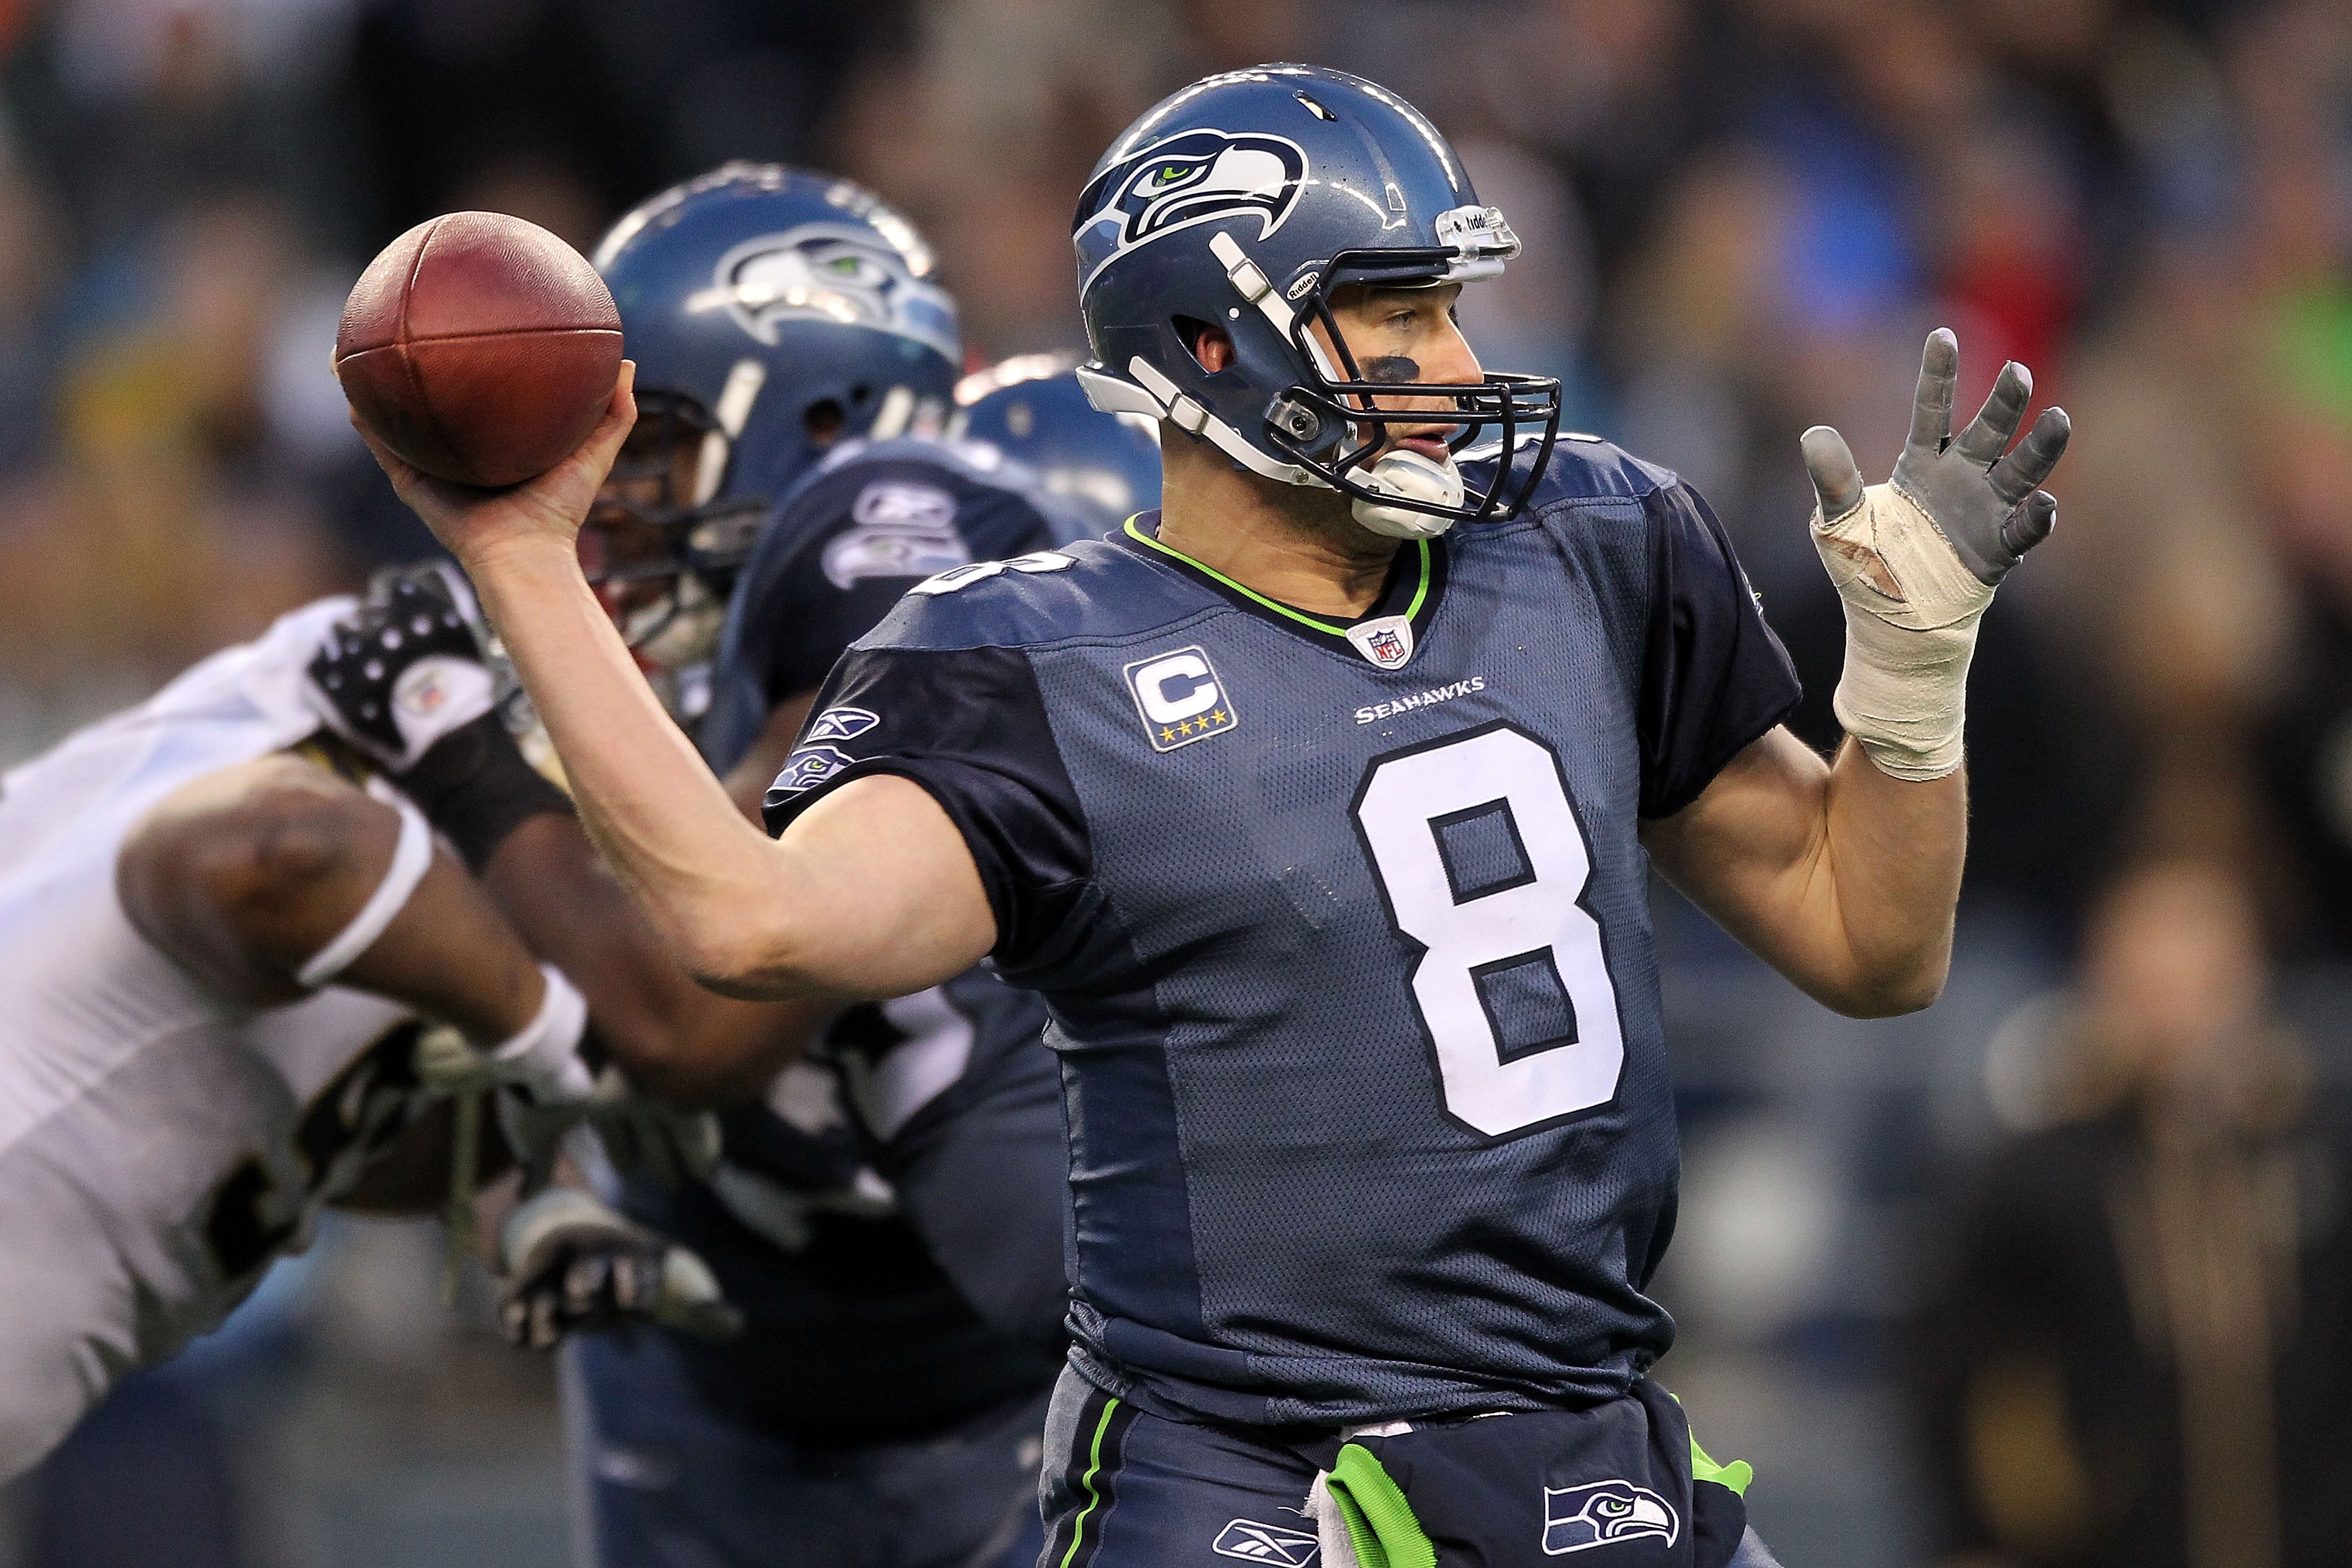 SEATTLE, WA - JANUARY 08:  Quarterback Matt Hasselbeck #8 of the Seattle Seahawks throws the ball in the second half against the New Orleans Saints during the 2011 NFC wild-card playoff game at Qwest Field on January 8, 2011 in Seattle, Washington.  (Phot